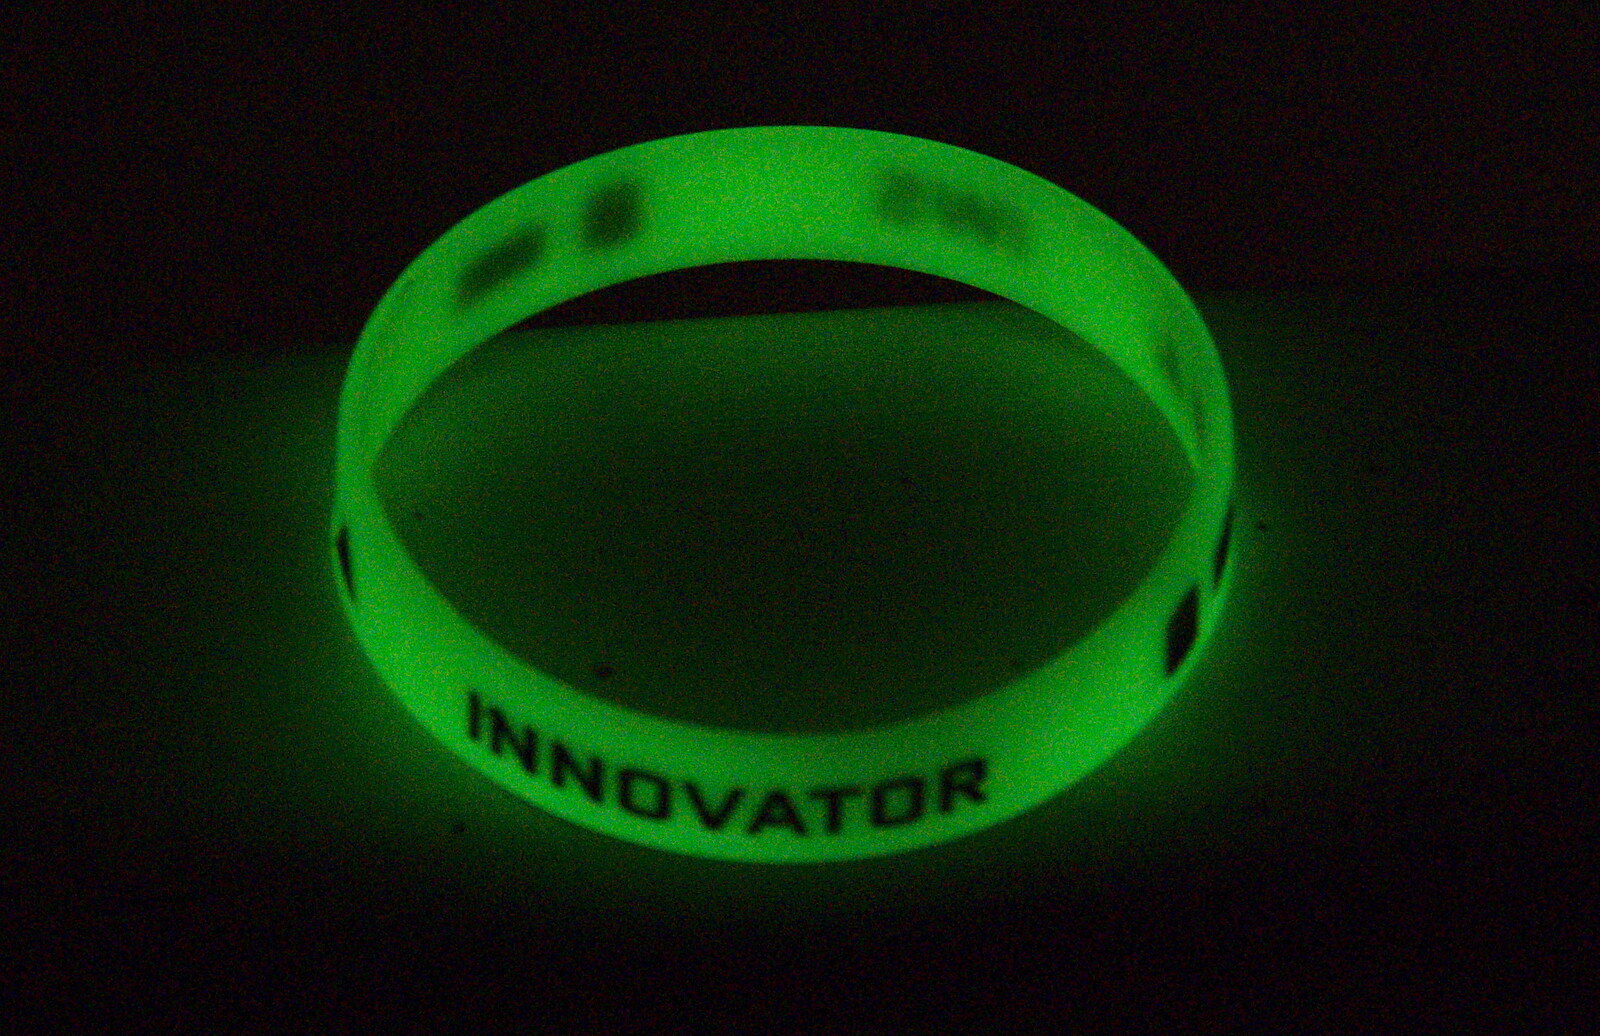 The Hack Week bracelet glows in the dark from The BSCC at The Crown and Hot Summer Days, Diss, Pulham and London - 24th July 2018